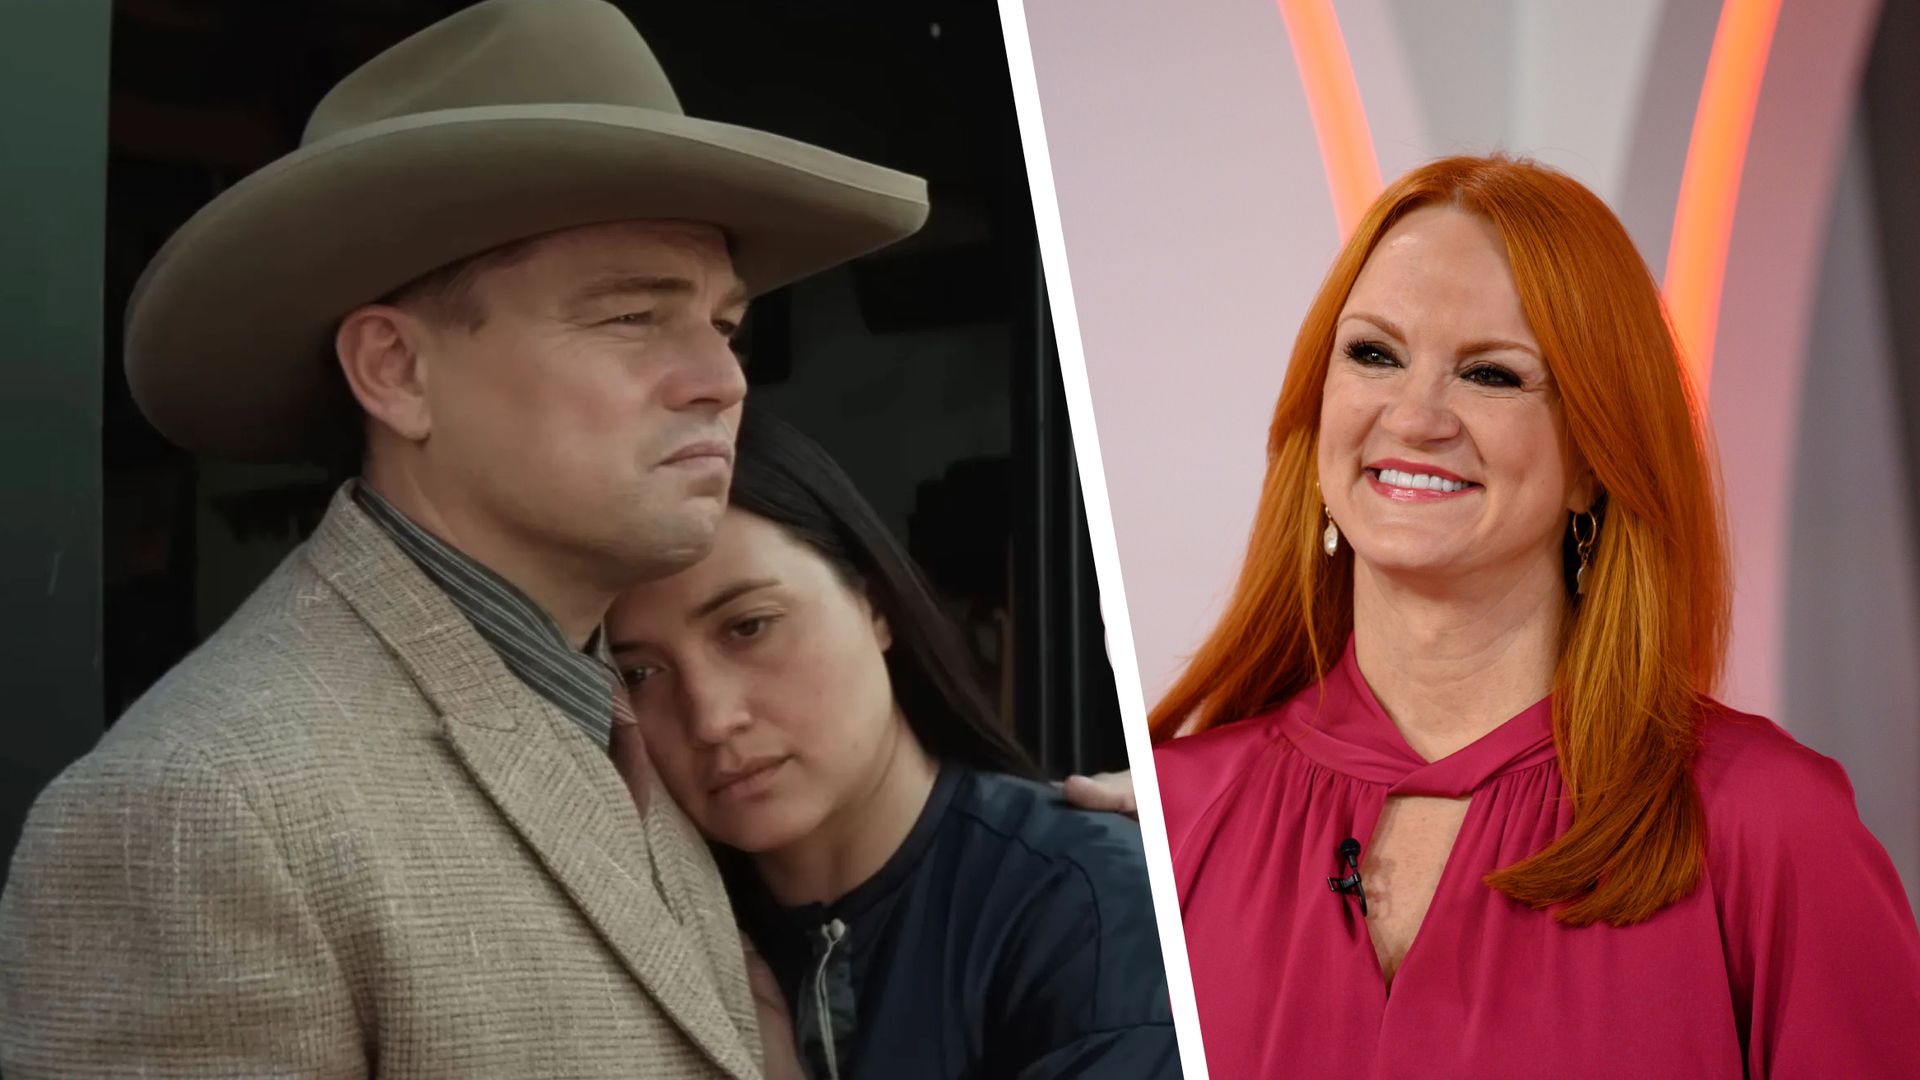 The surprising connection between Pioneer Woman's Ree Drummond and